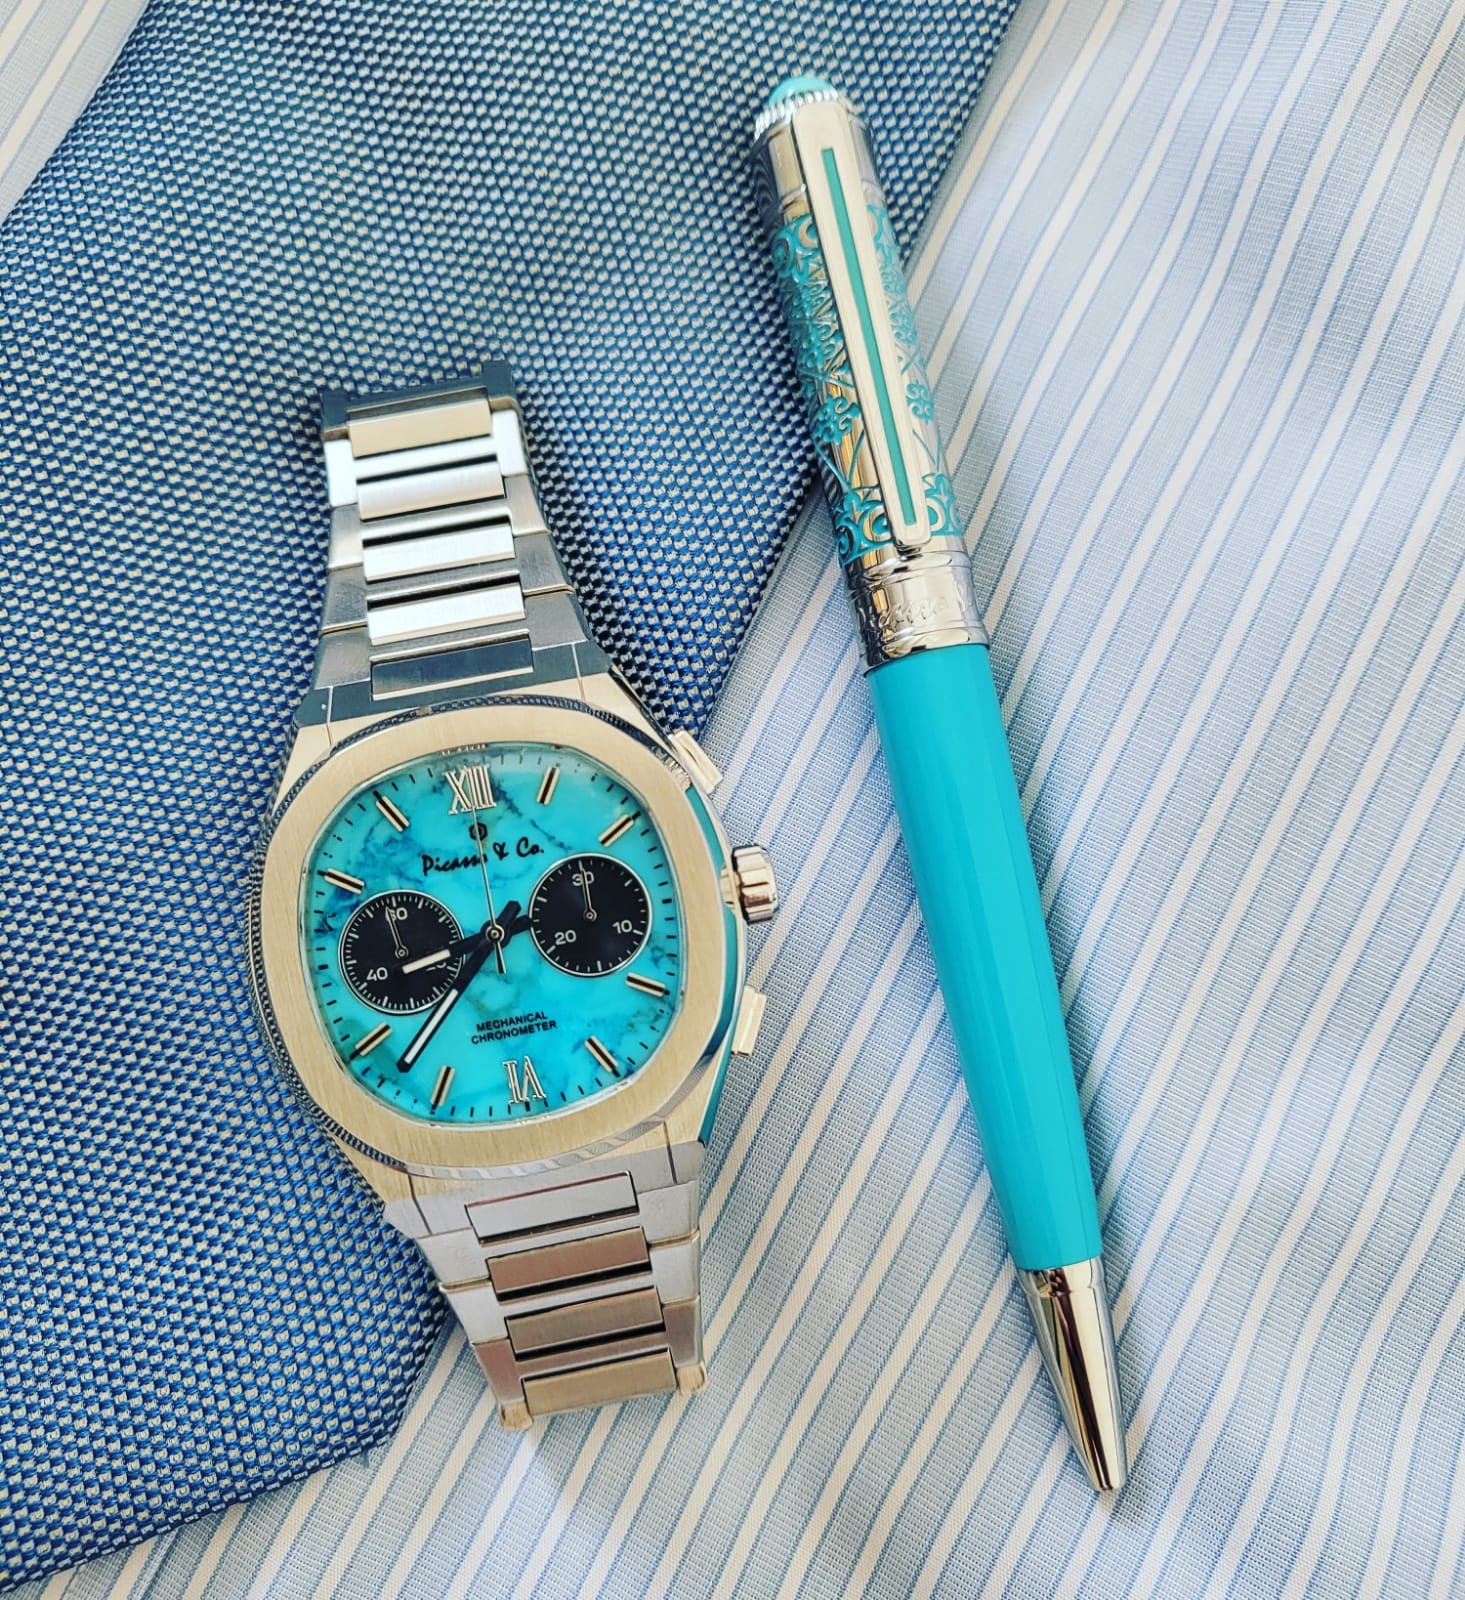 Gadget Watch: Pen makes old monitors touch-ready